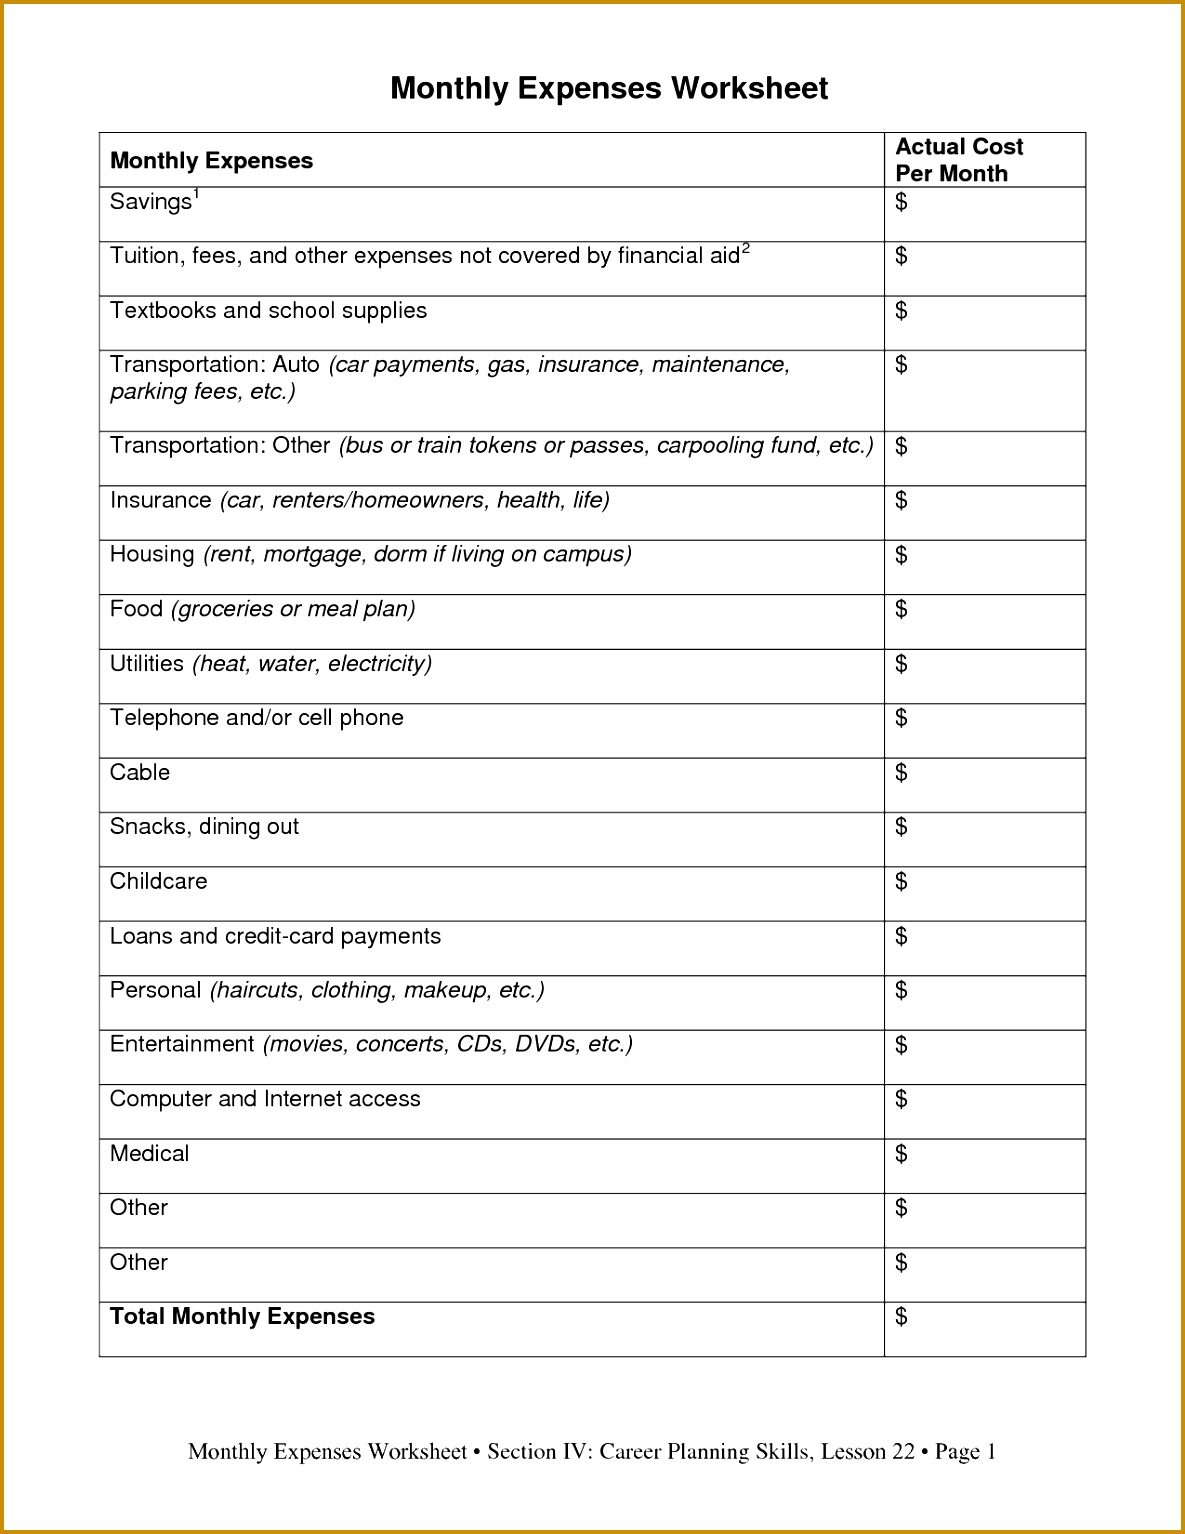 Monthly Expense Worksheet Template 15341185